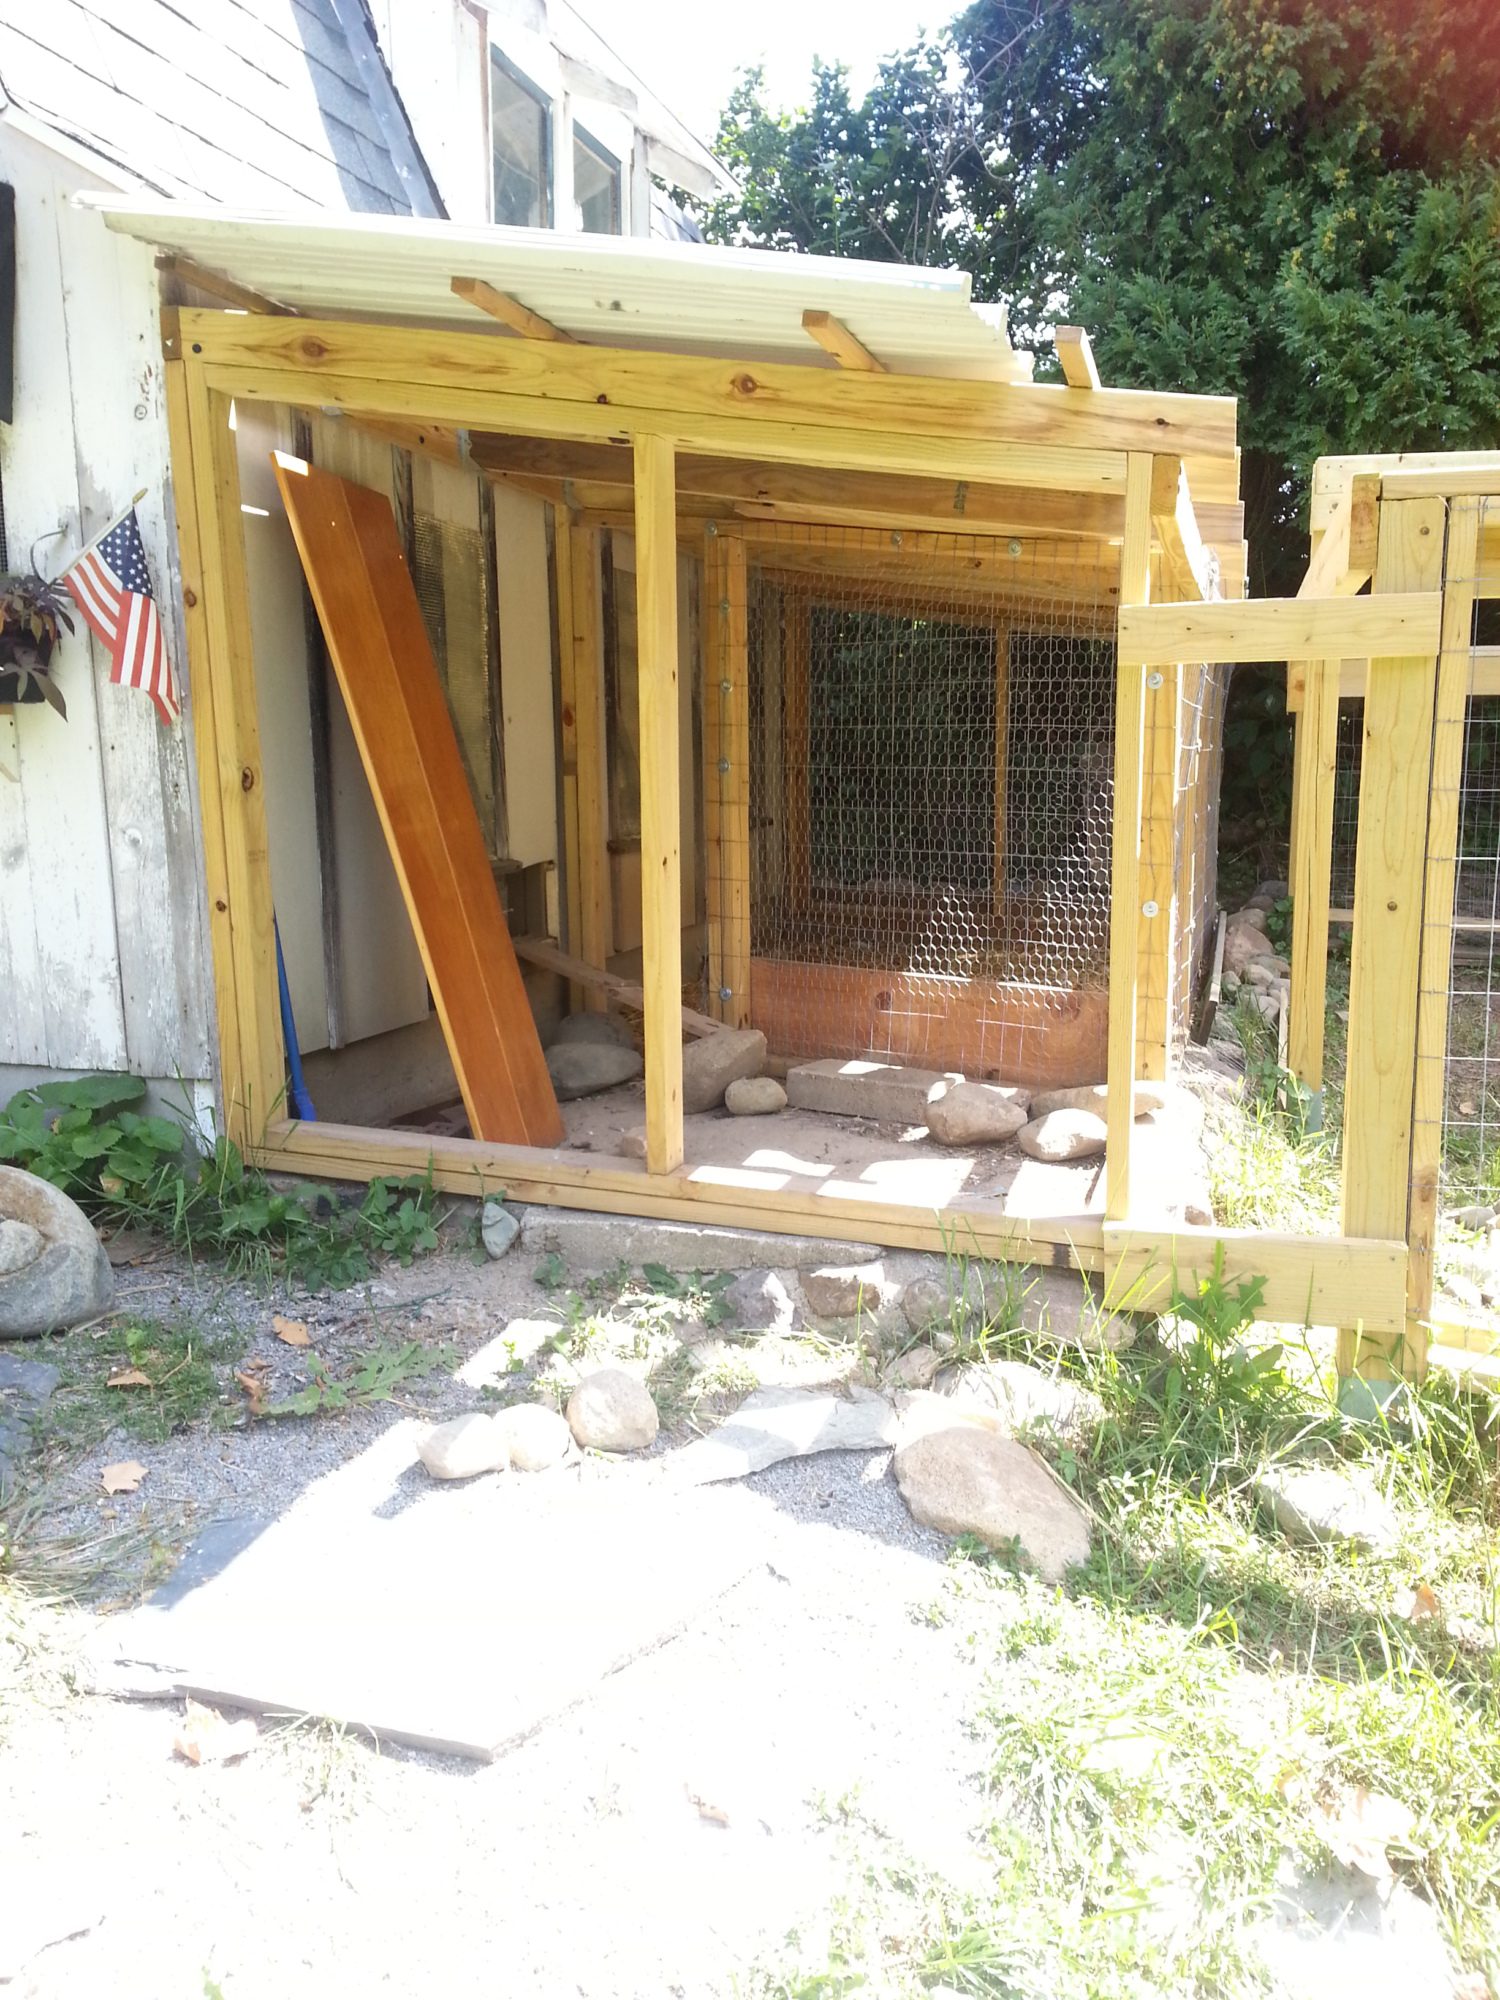 This small run, 5 x13 1/2 ft, is original square footage with the "barn" . The original builder/owner used  a stone foundation to keep predators from digging. He had hole in the foundation for posts and chicken wire. I have added a frame (and a roof.)